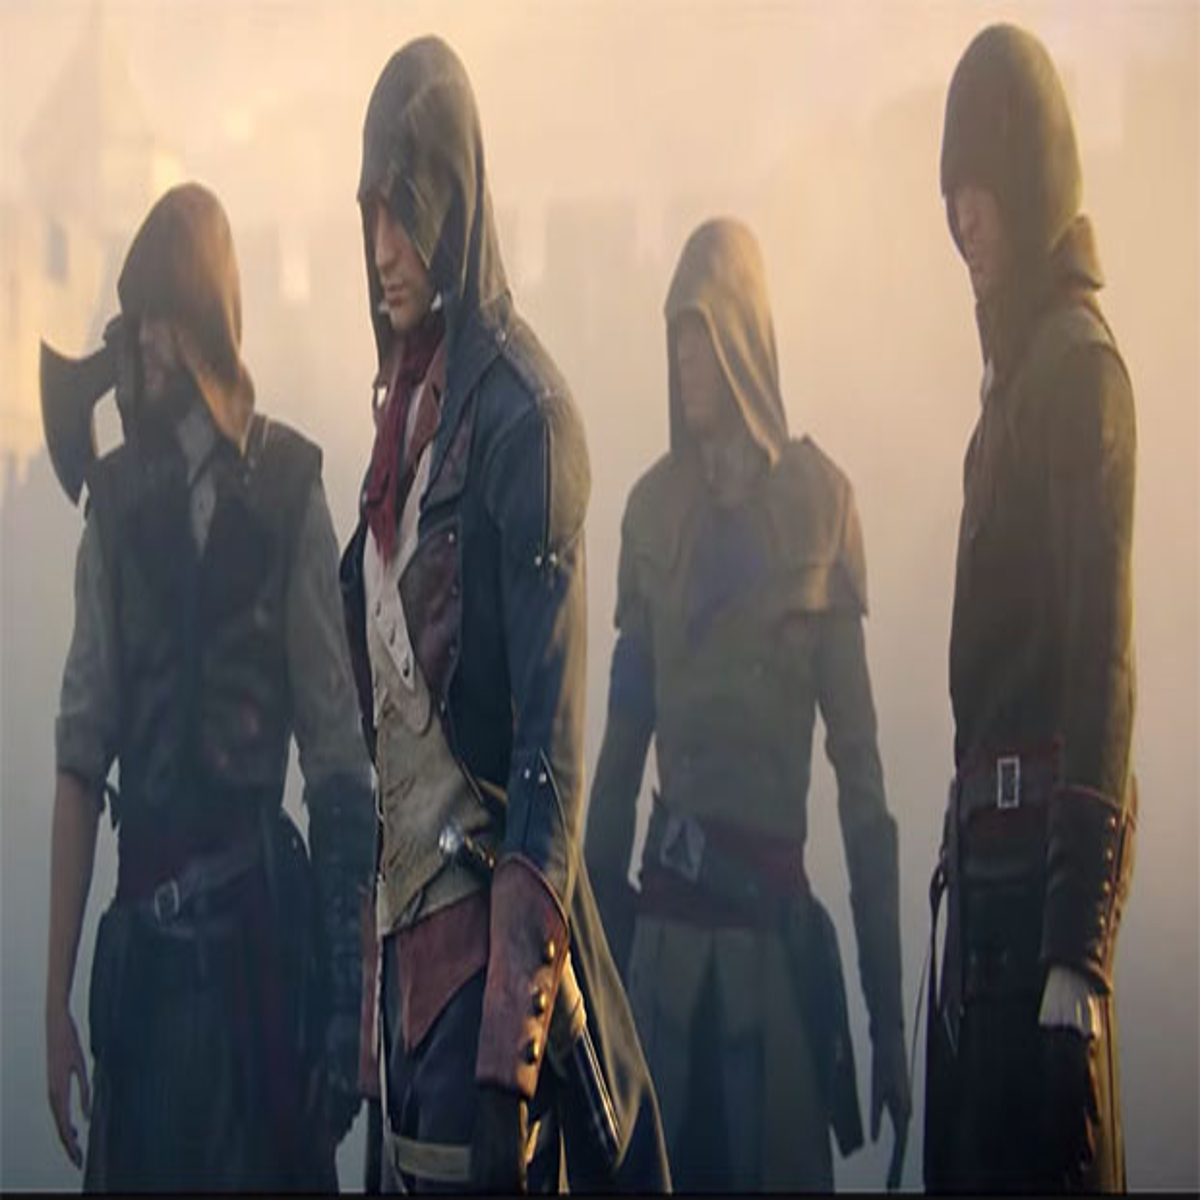 Assassin's Creed Unity Is Actually Pretty Good Now